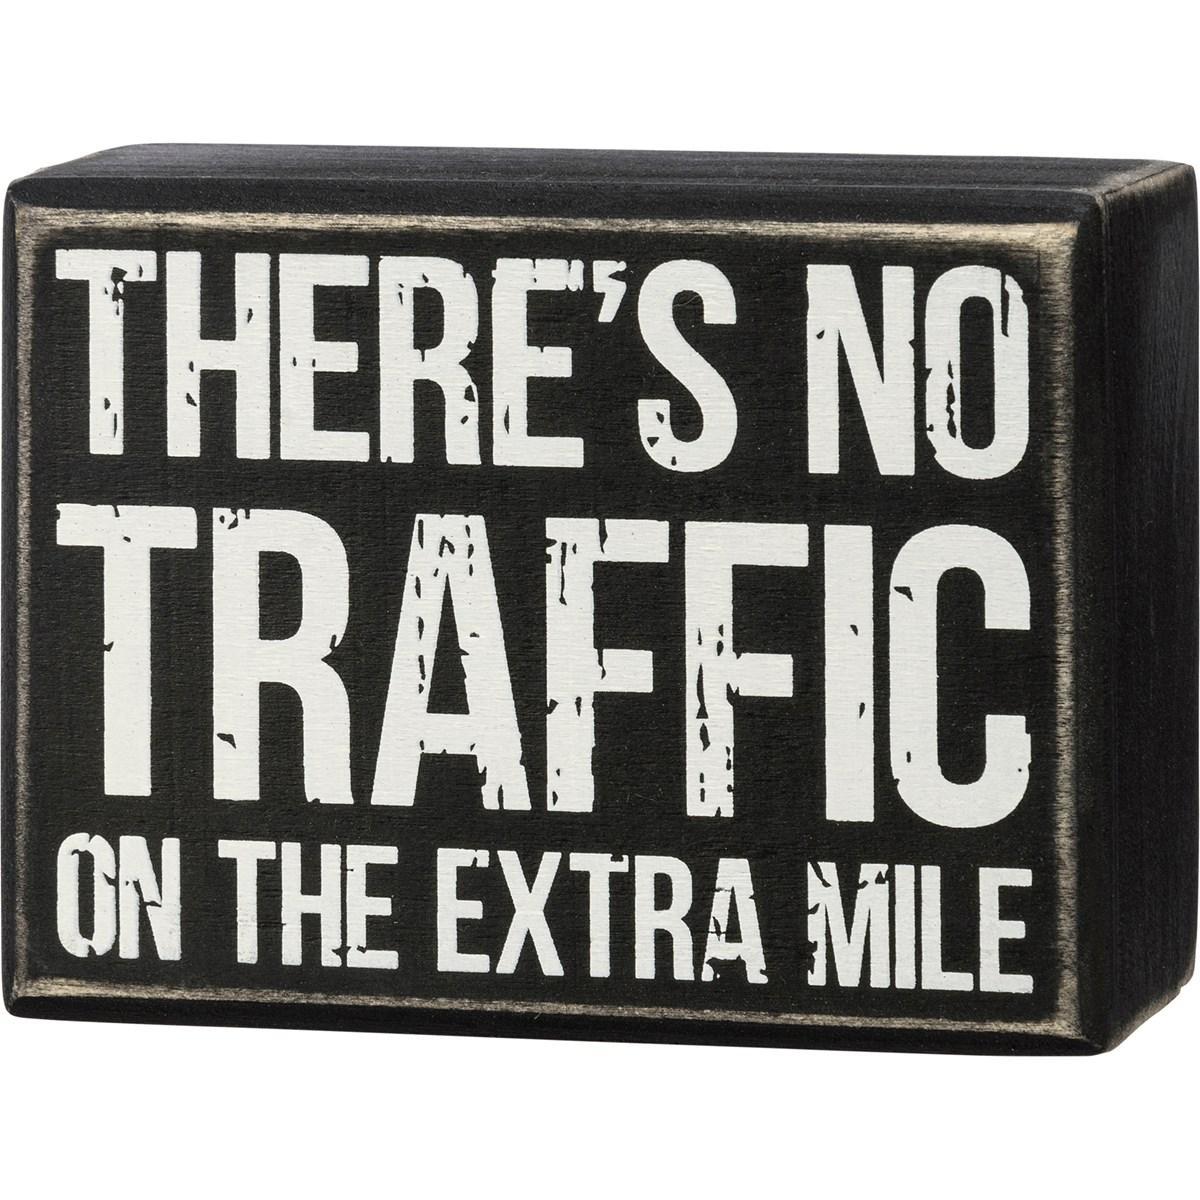 The Extra Mile Box Sign